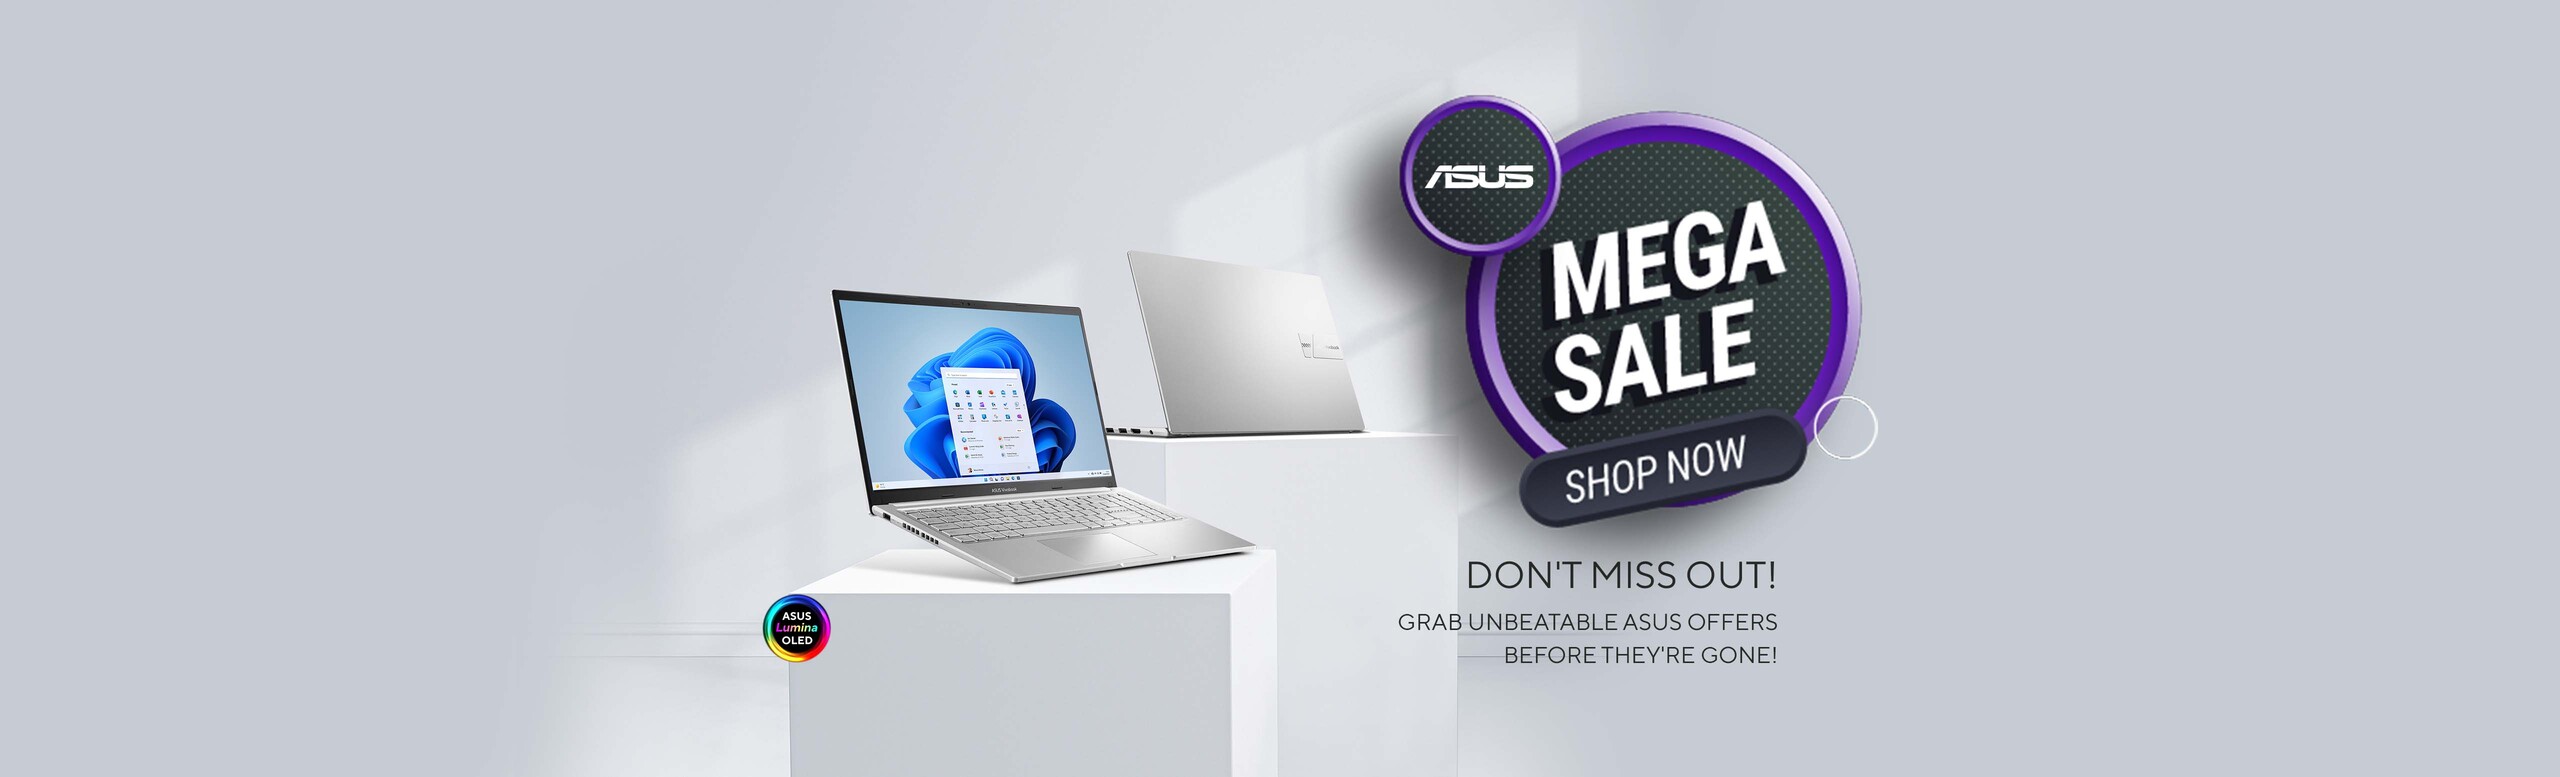 Biggest savings on ASUS and ROG Laptops